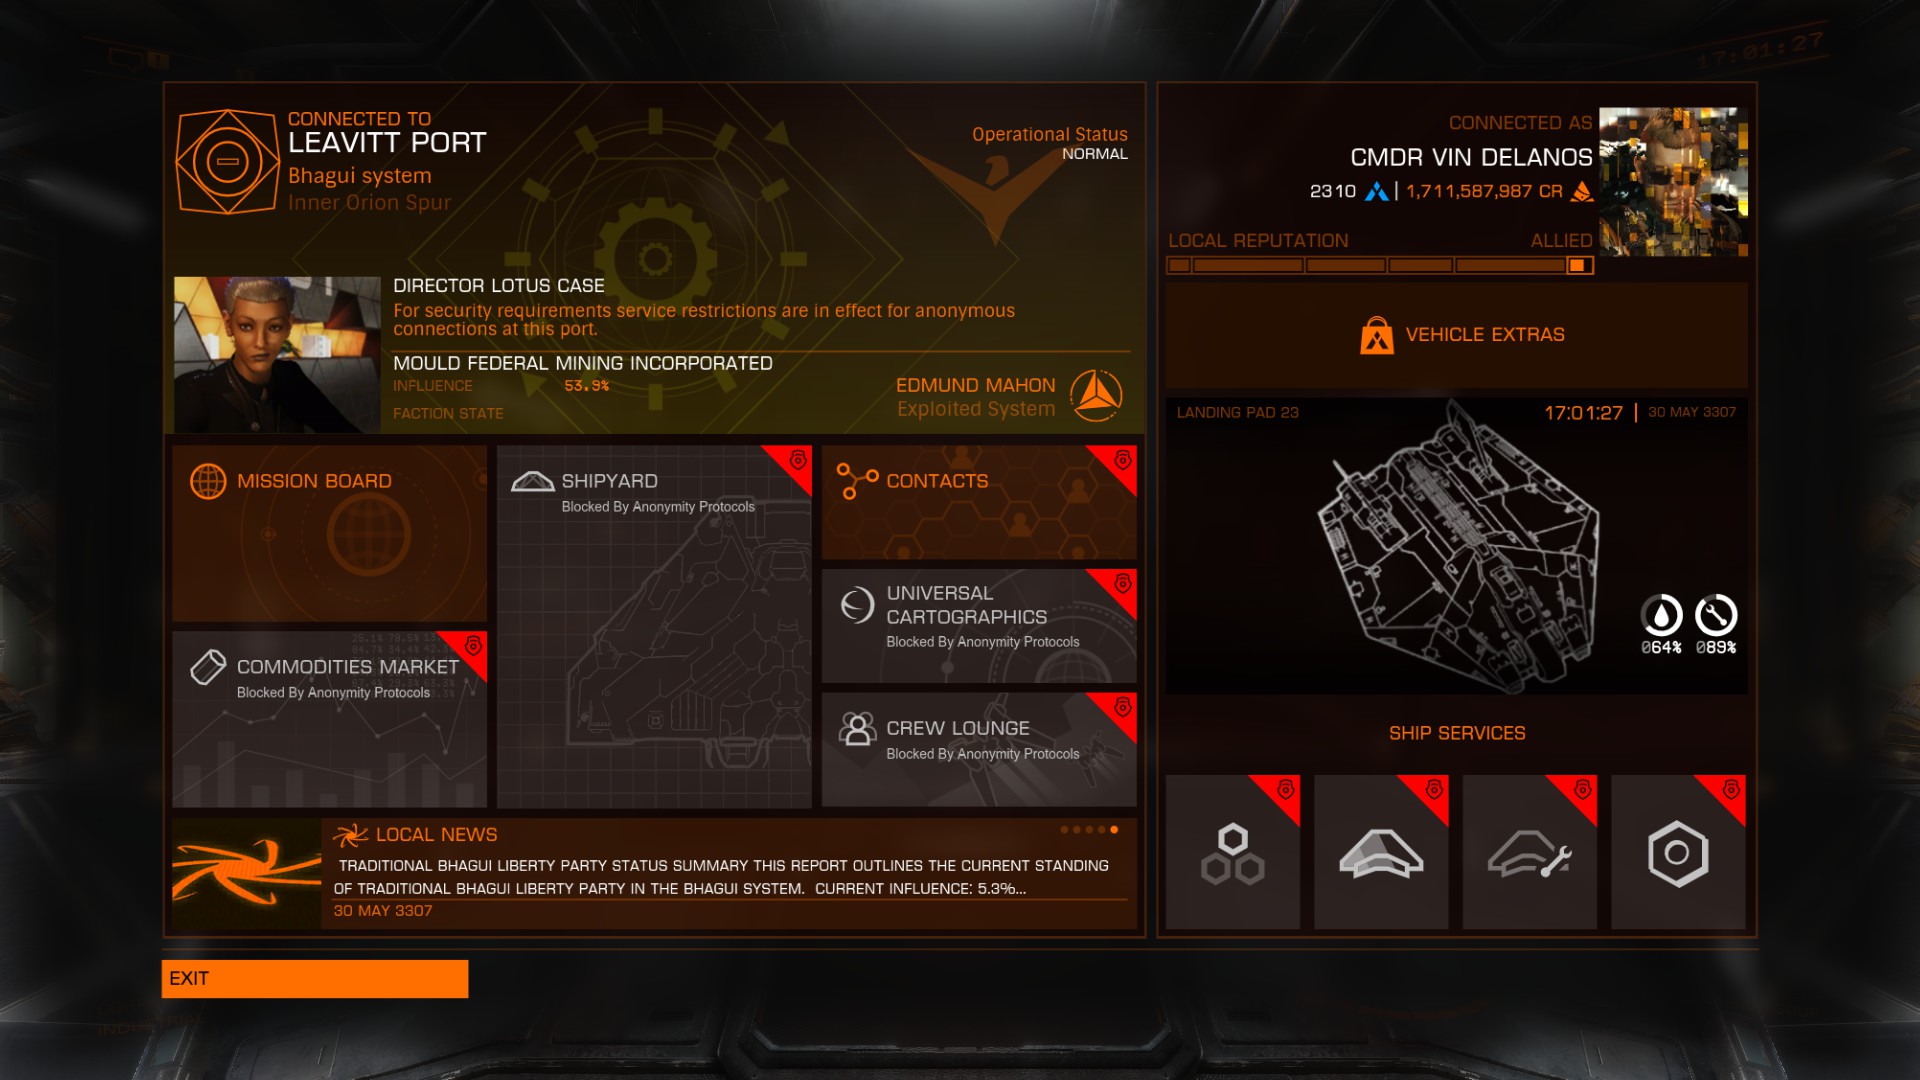 Elite Dangerous: Odyssey BGS and crime details | Page 5 | Frontier Forums